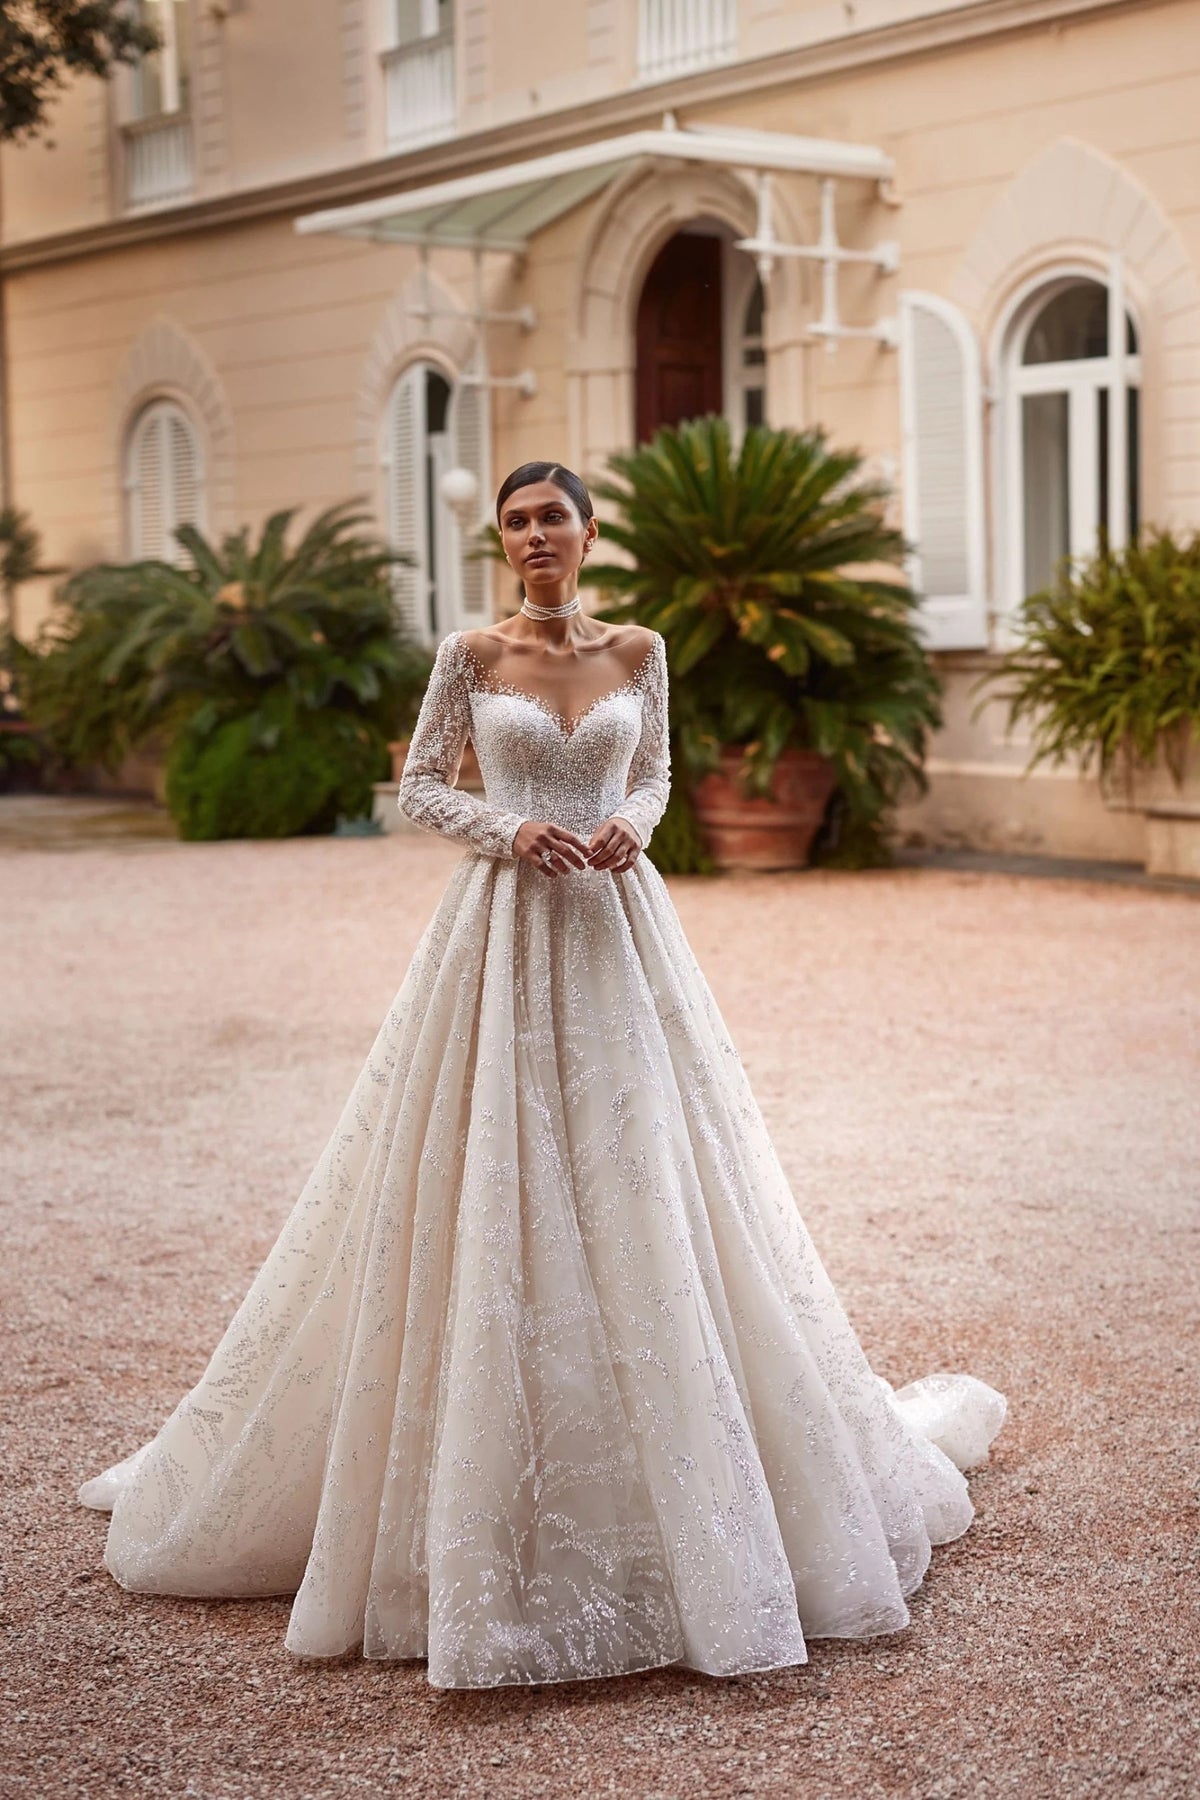 Stunning Aline Long Illusion Sleeves Translucent Bodice Sweetheart Neckline Pearl Wedding Dress Bridal Gown Sparkle Fabric